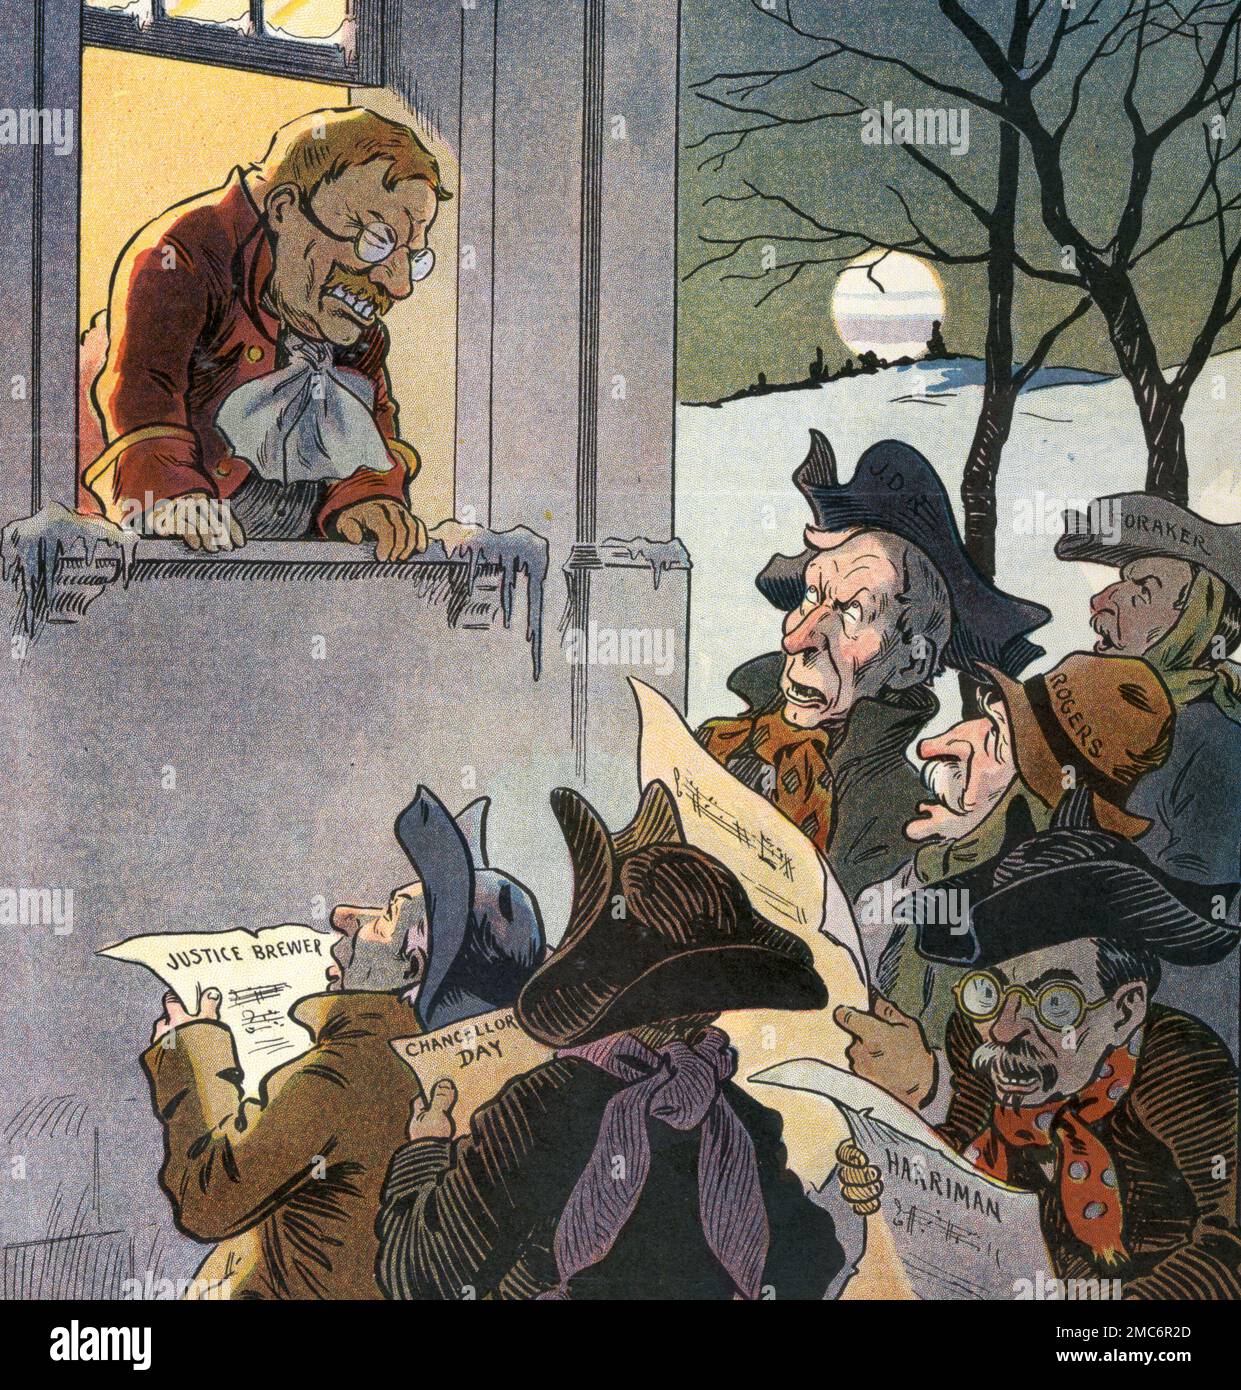 God rest you, merry gentleman, let nothing you dismay - Illustration shows Theodore Roosevelt standing at an open window greeting a group of men singing Christmas carols; the carolers are John D. Rockefeller, Joseph B. Foraker, Henry H. Rogers, Edward H. Harriman, David J. Brewer, and James R. Day  - Political Cartoon, 1907 Stock Photo